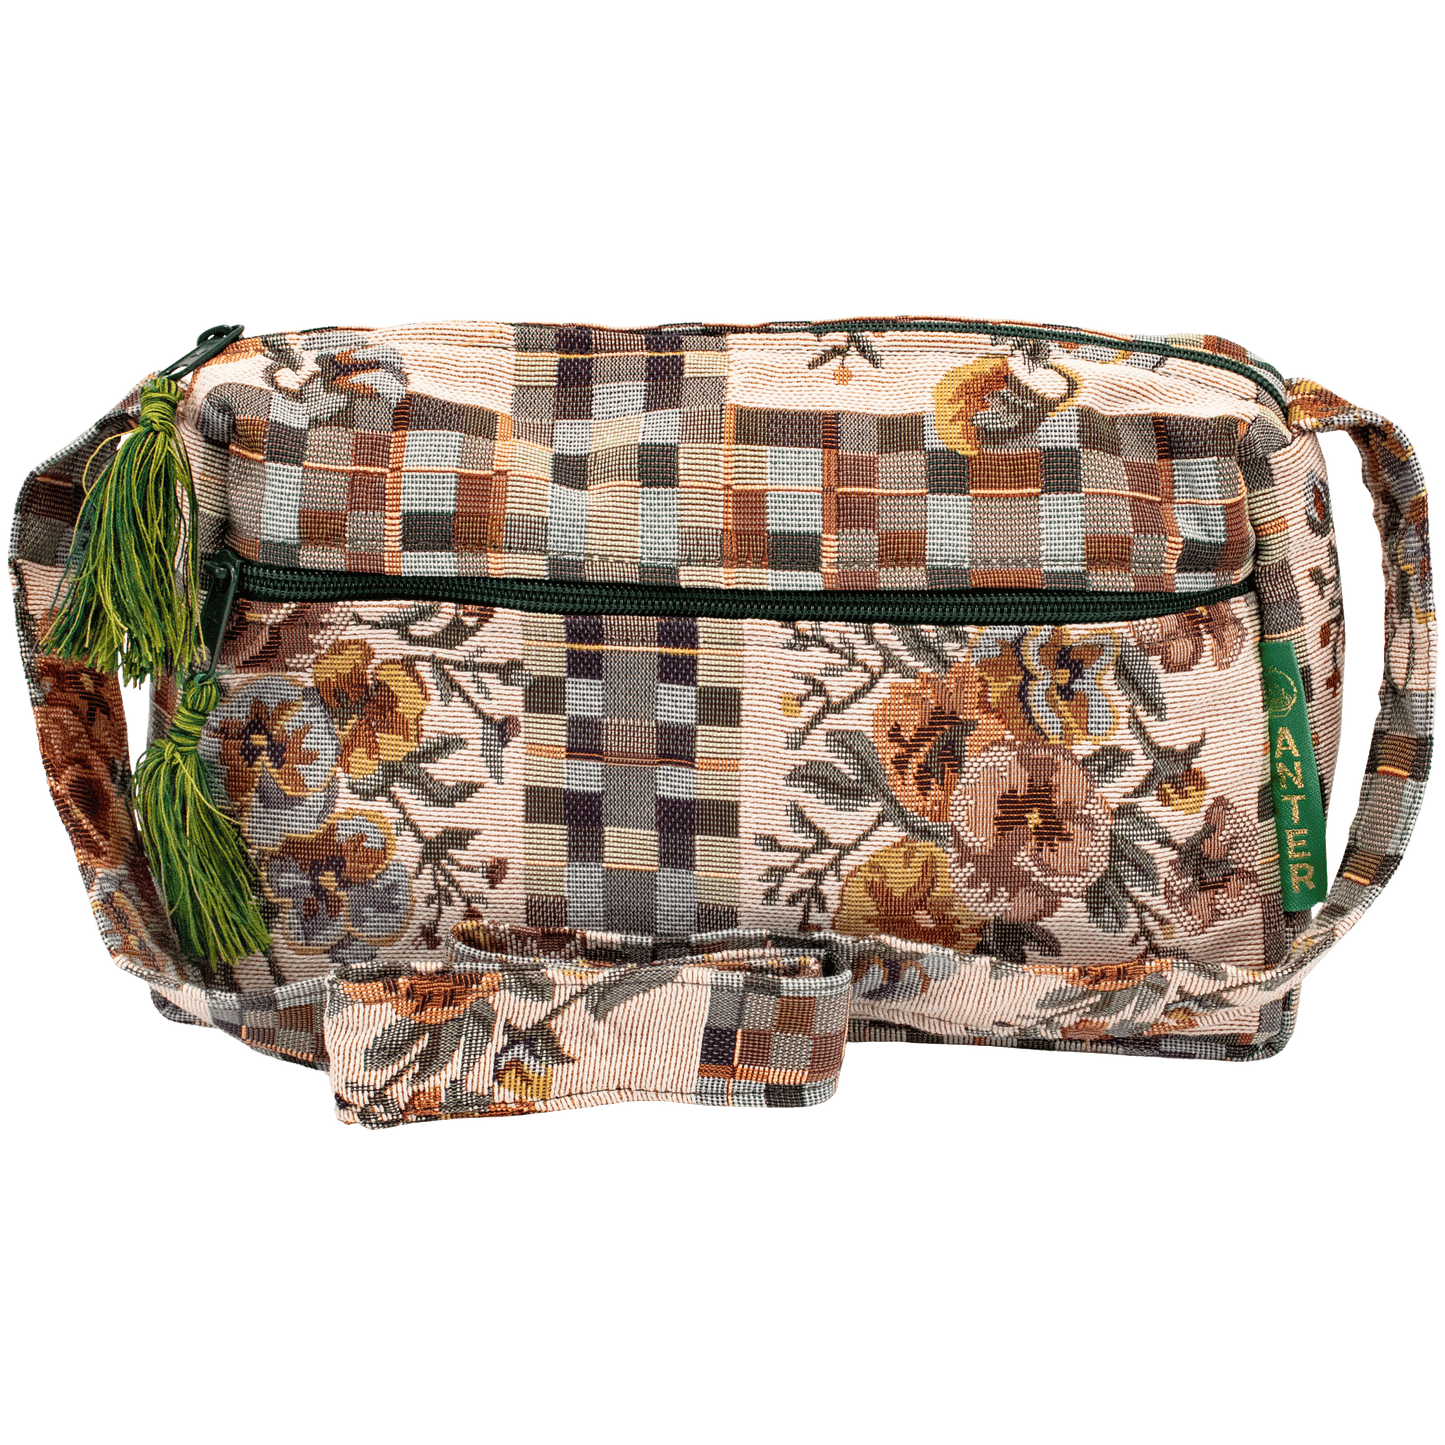 Medium crossbody shoulder bag green and earthy tone square floral pattern